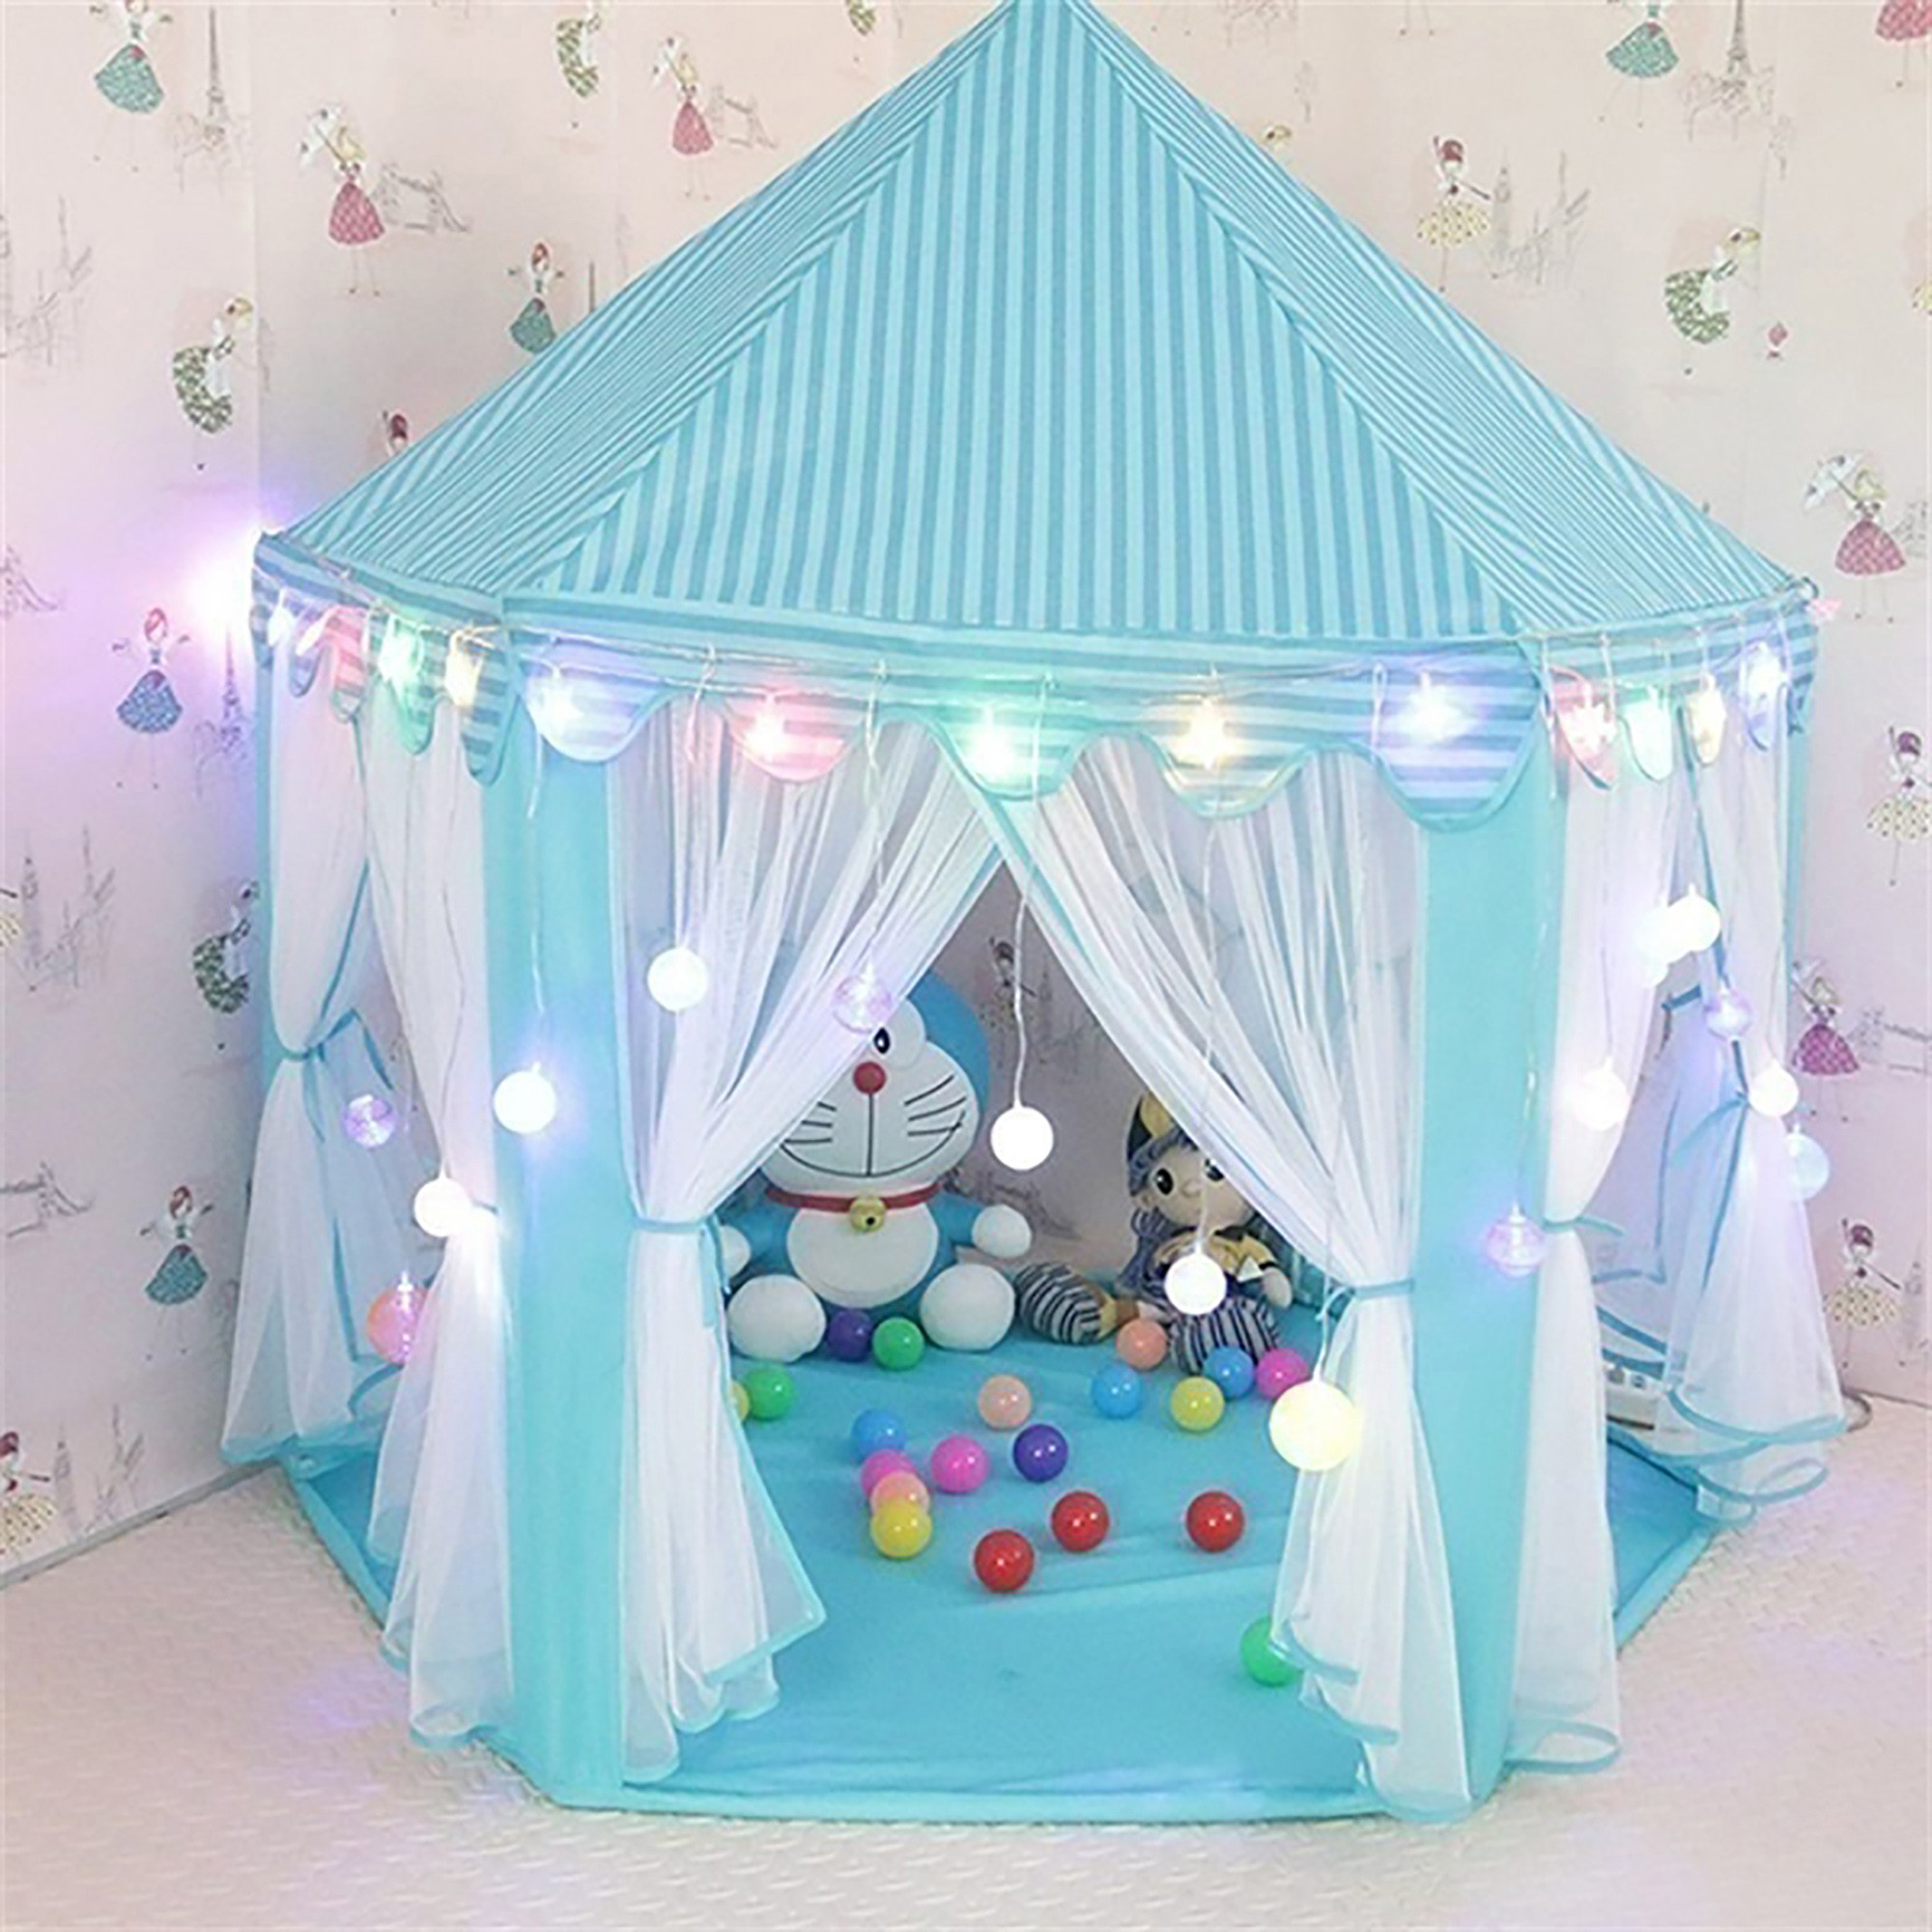 Indoor Play Tent For Kids
 Tents for Girls Outdoor Indoor Portable Folding Princess